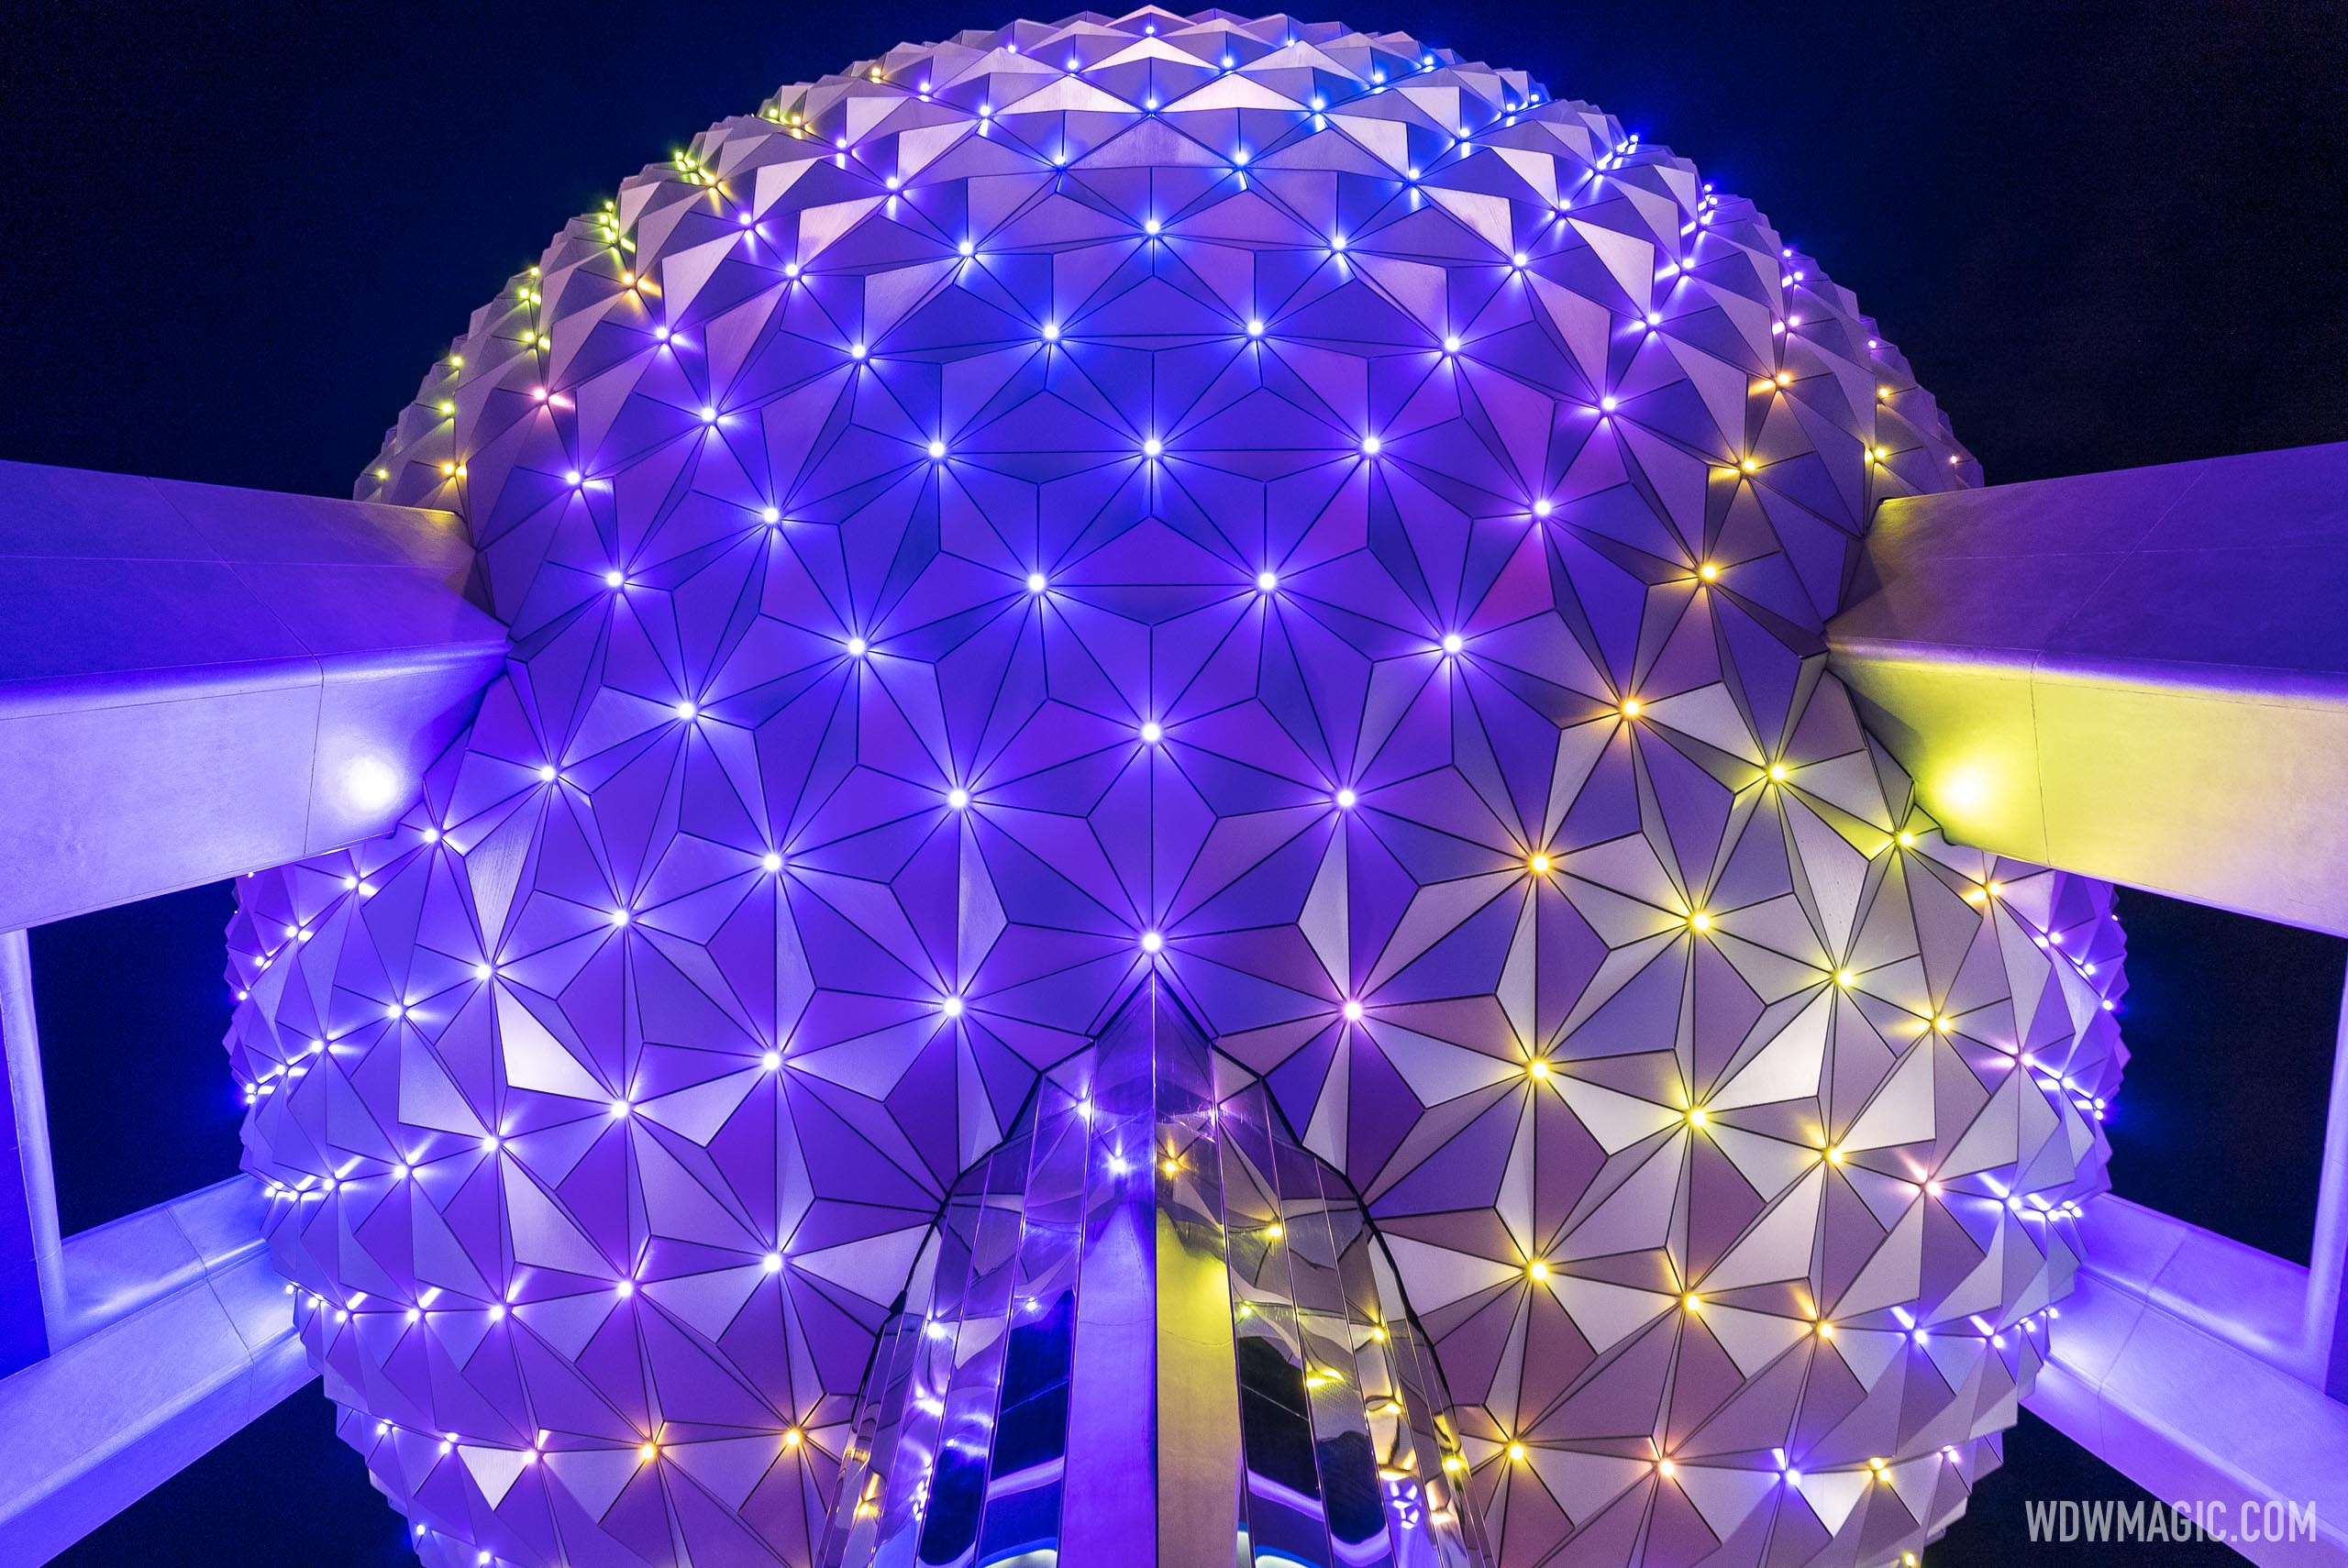 A look at Spaceship Earth's new 'Points of Light' nighttime illumination